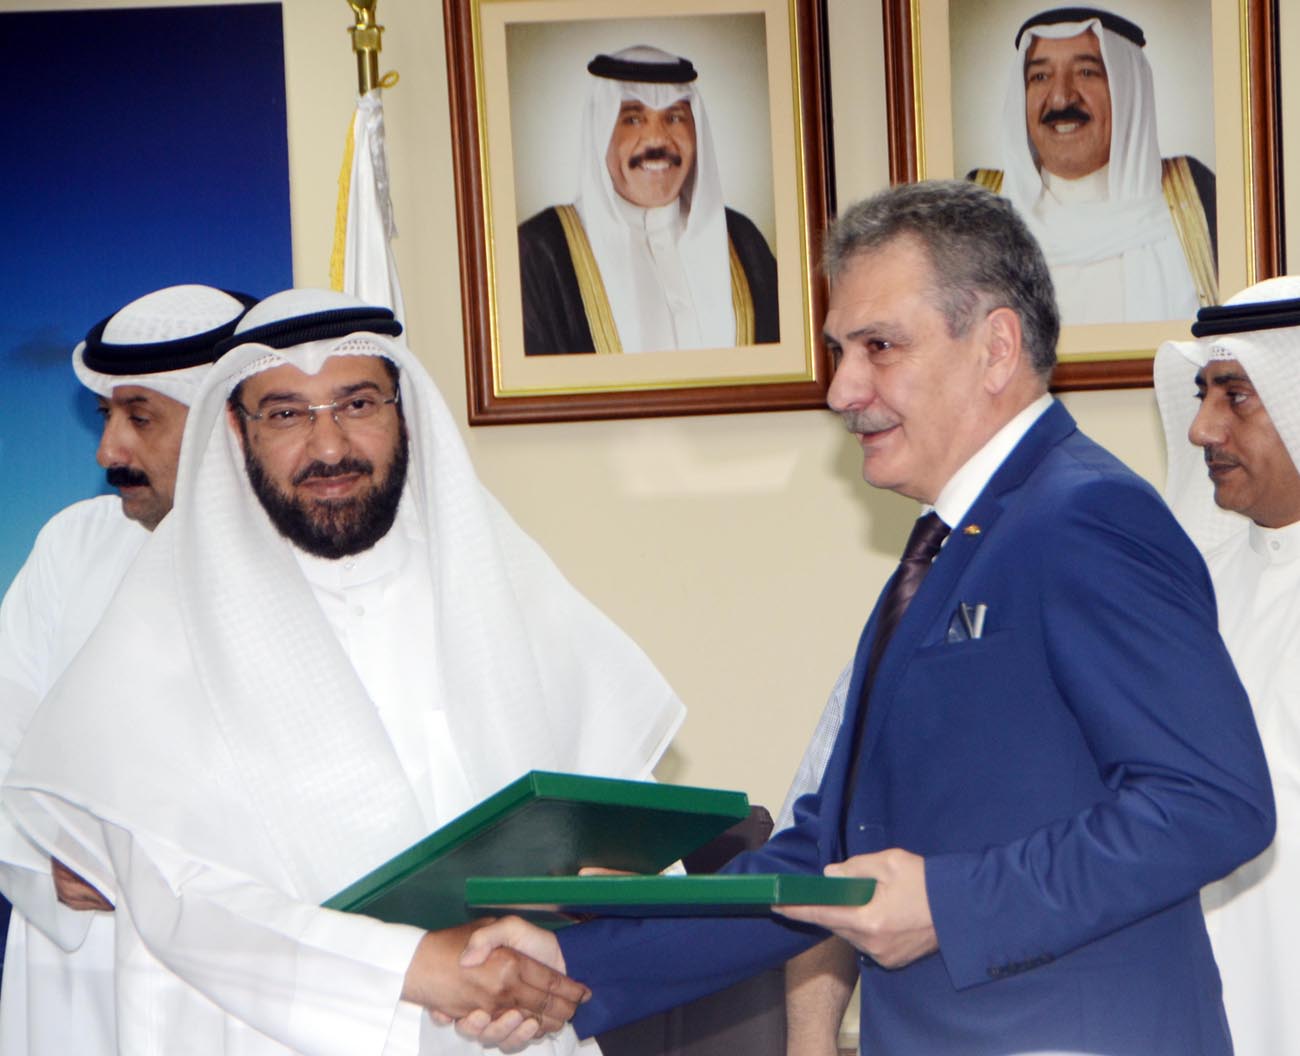 Minister of Public Works and Minister of State for National Assembly Affairs Dr. Ali Al-Omair and Vice Chairman of Limak Holding Sezai Bacaksiz during the signature ceremony